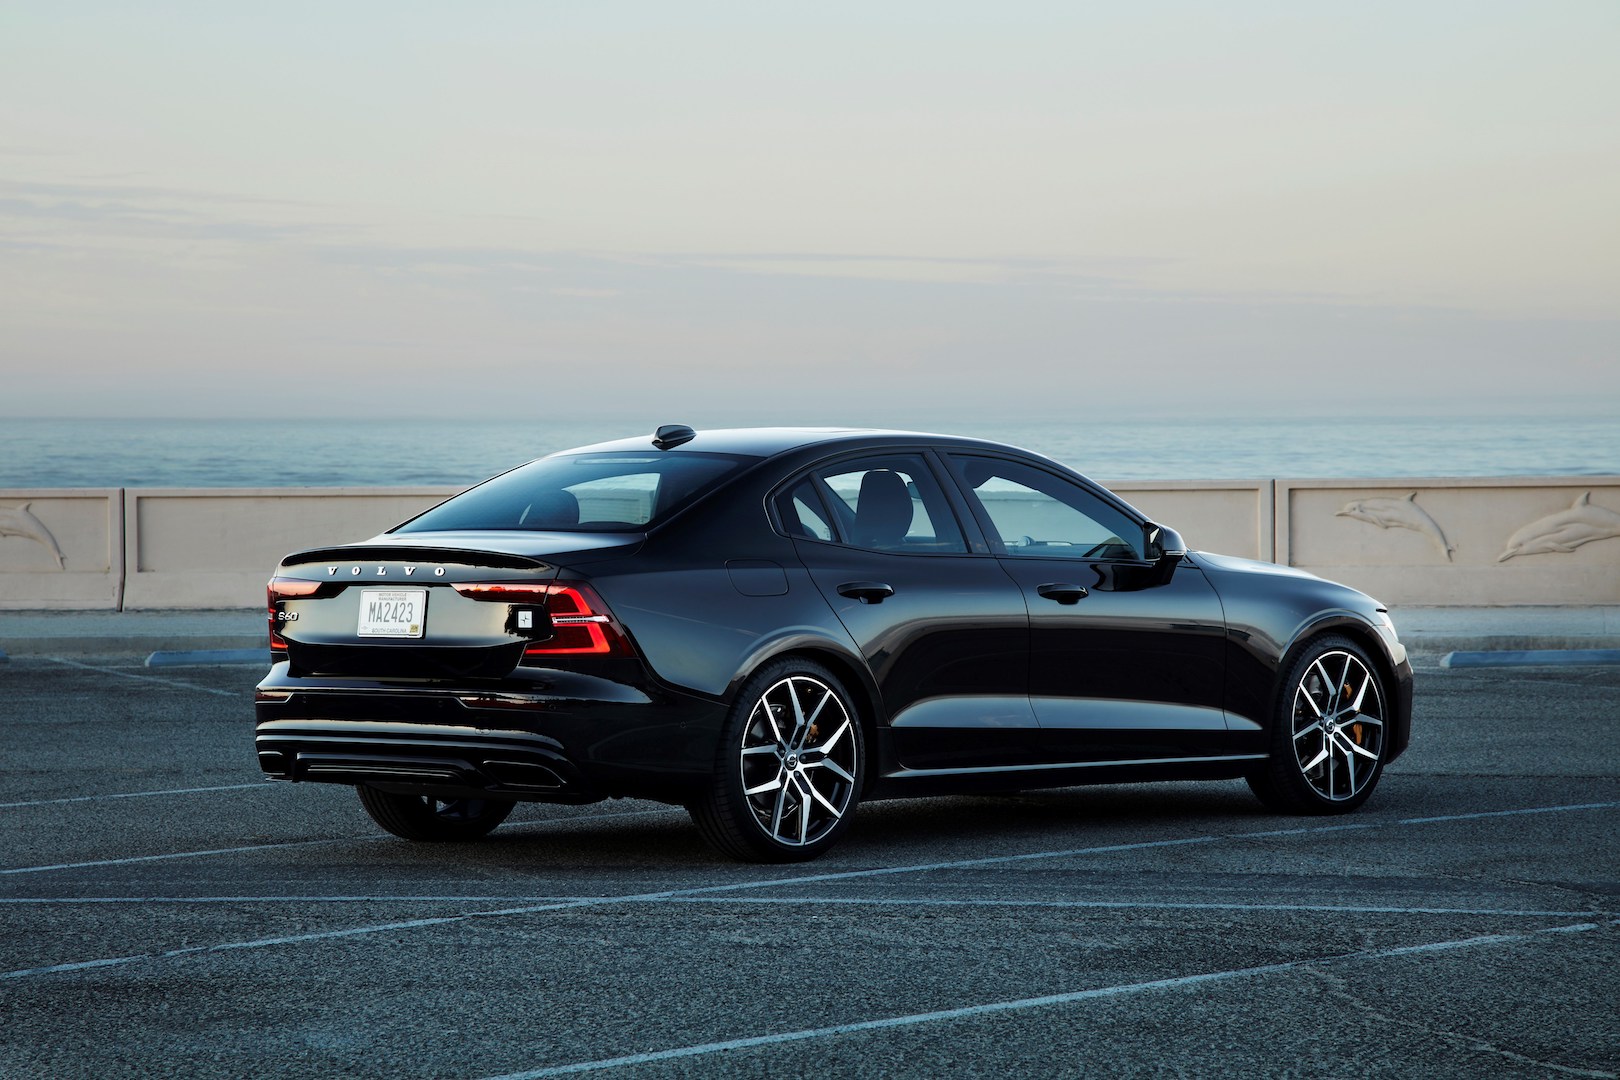 2019 Volvo S60 T8 Twin Engine Review: Half-Baked Hybrid Shows Volvo Is  Miles Behind Electric Car Leaders